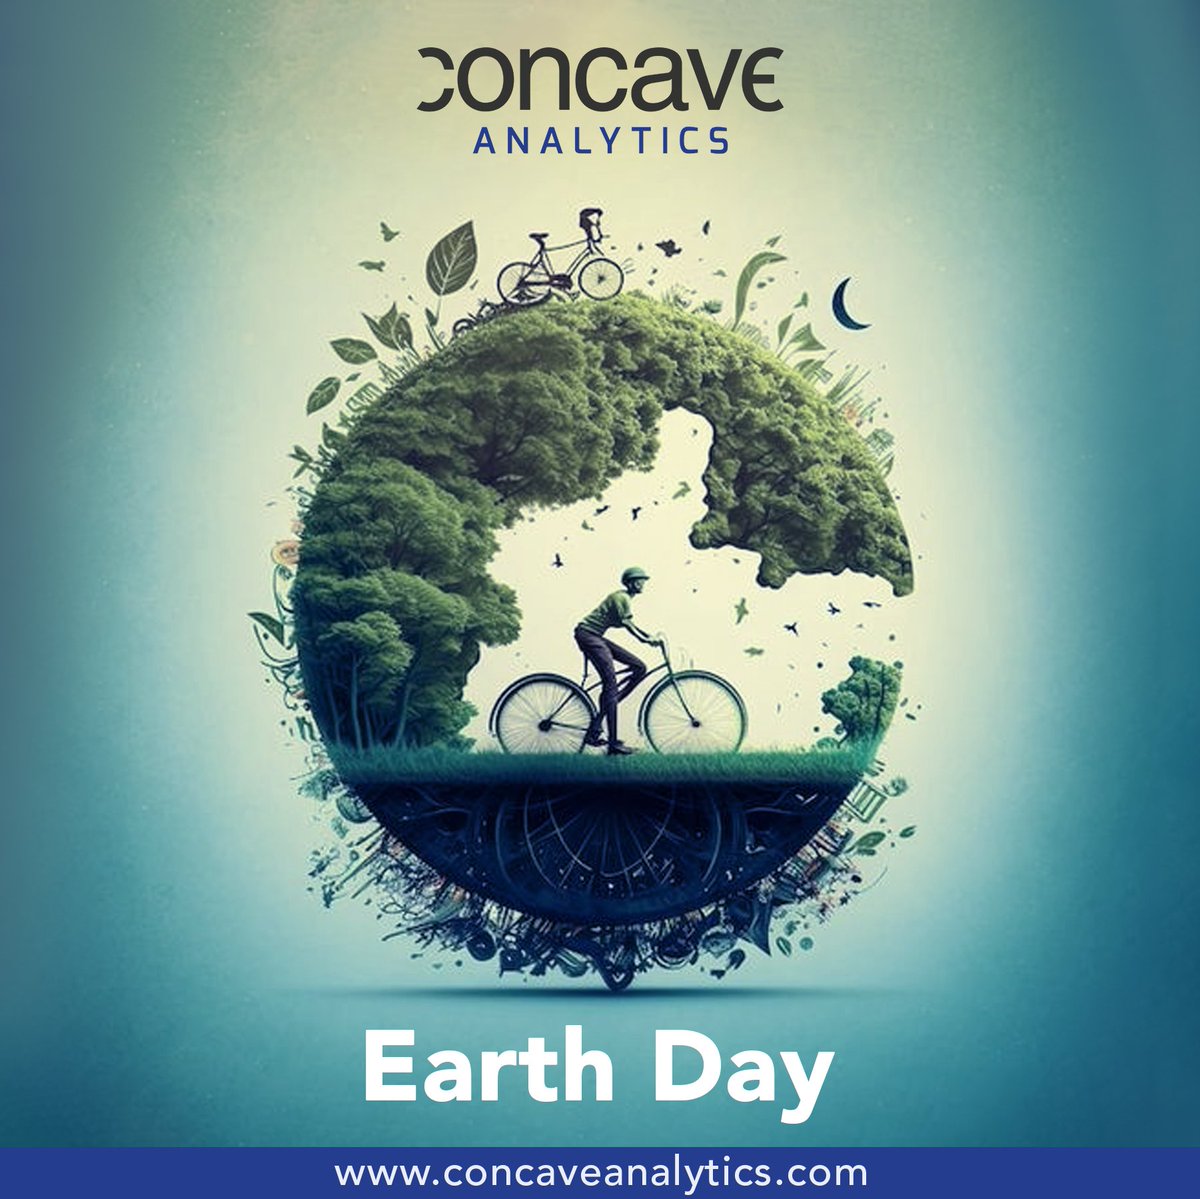 Let's celebrate Earth Day by embracing sustainable practices and protecting our planet for future generations. Together, we can make a positive impact on the world we call home. 

#ConcaveAnalytics #EarthDay #Sustainability #ProtectOurPlanet